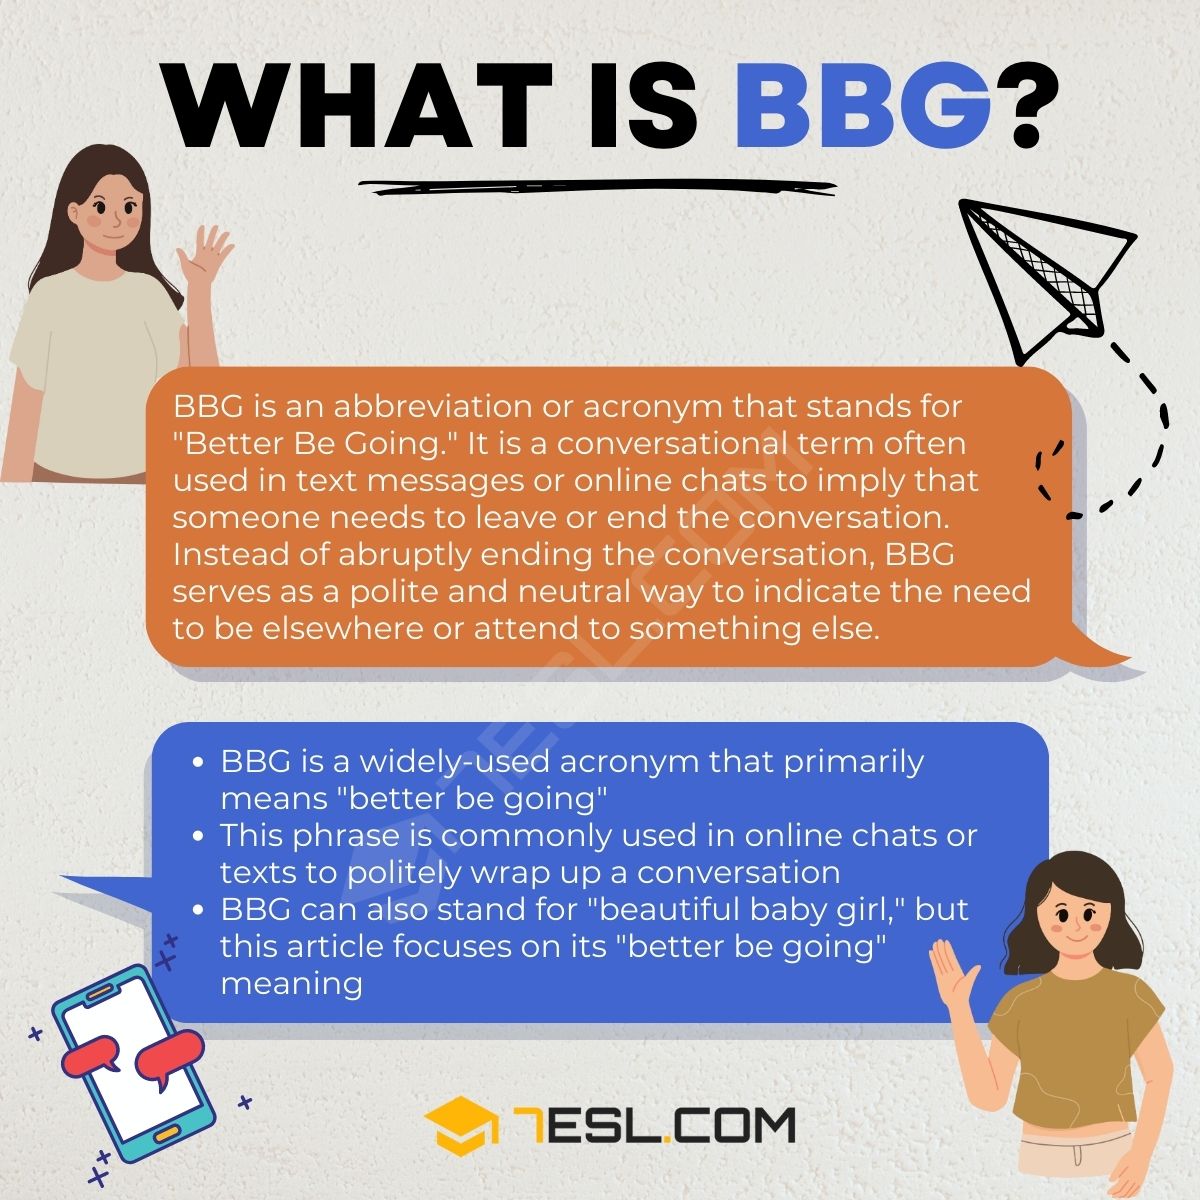 what does bbg stand for in texting